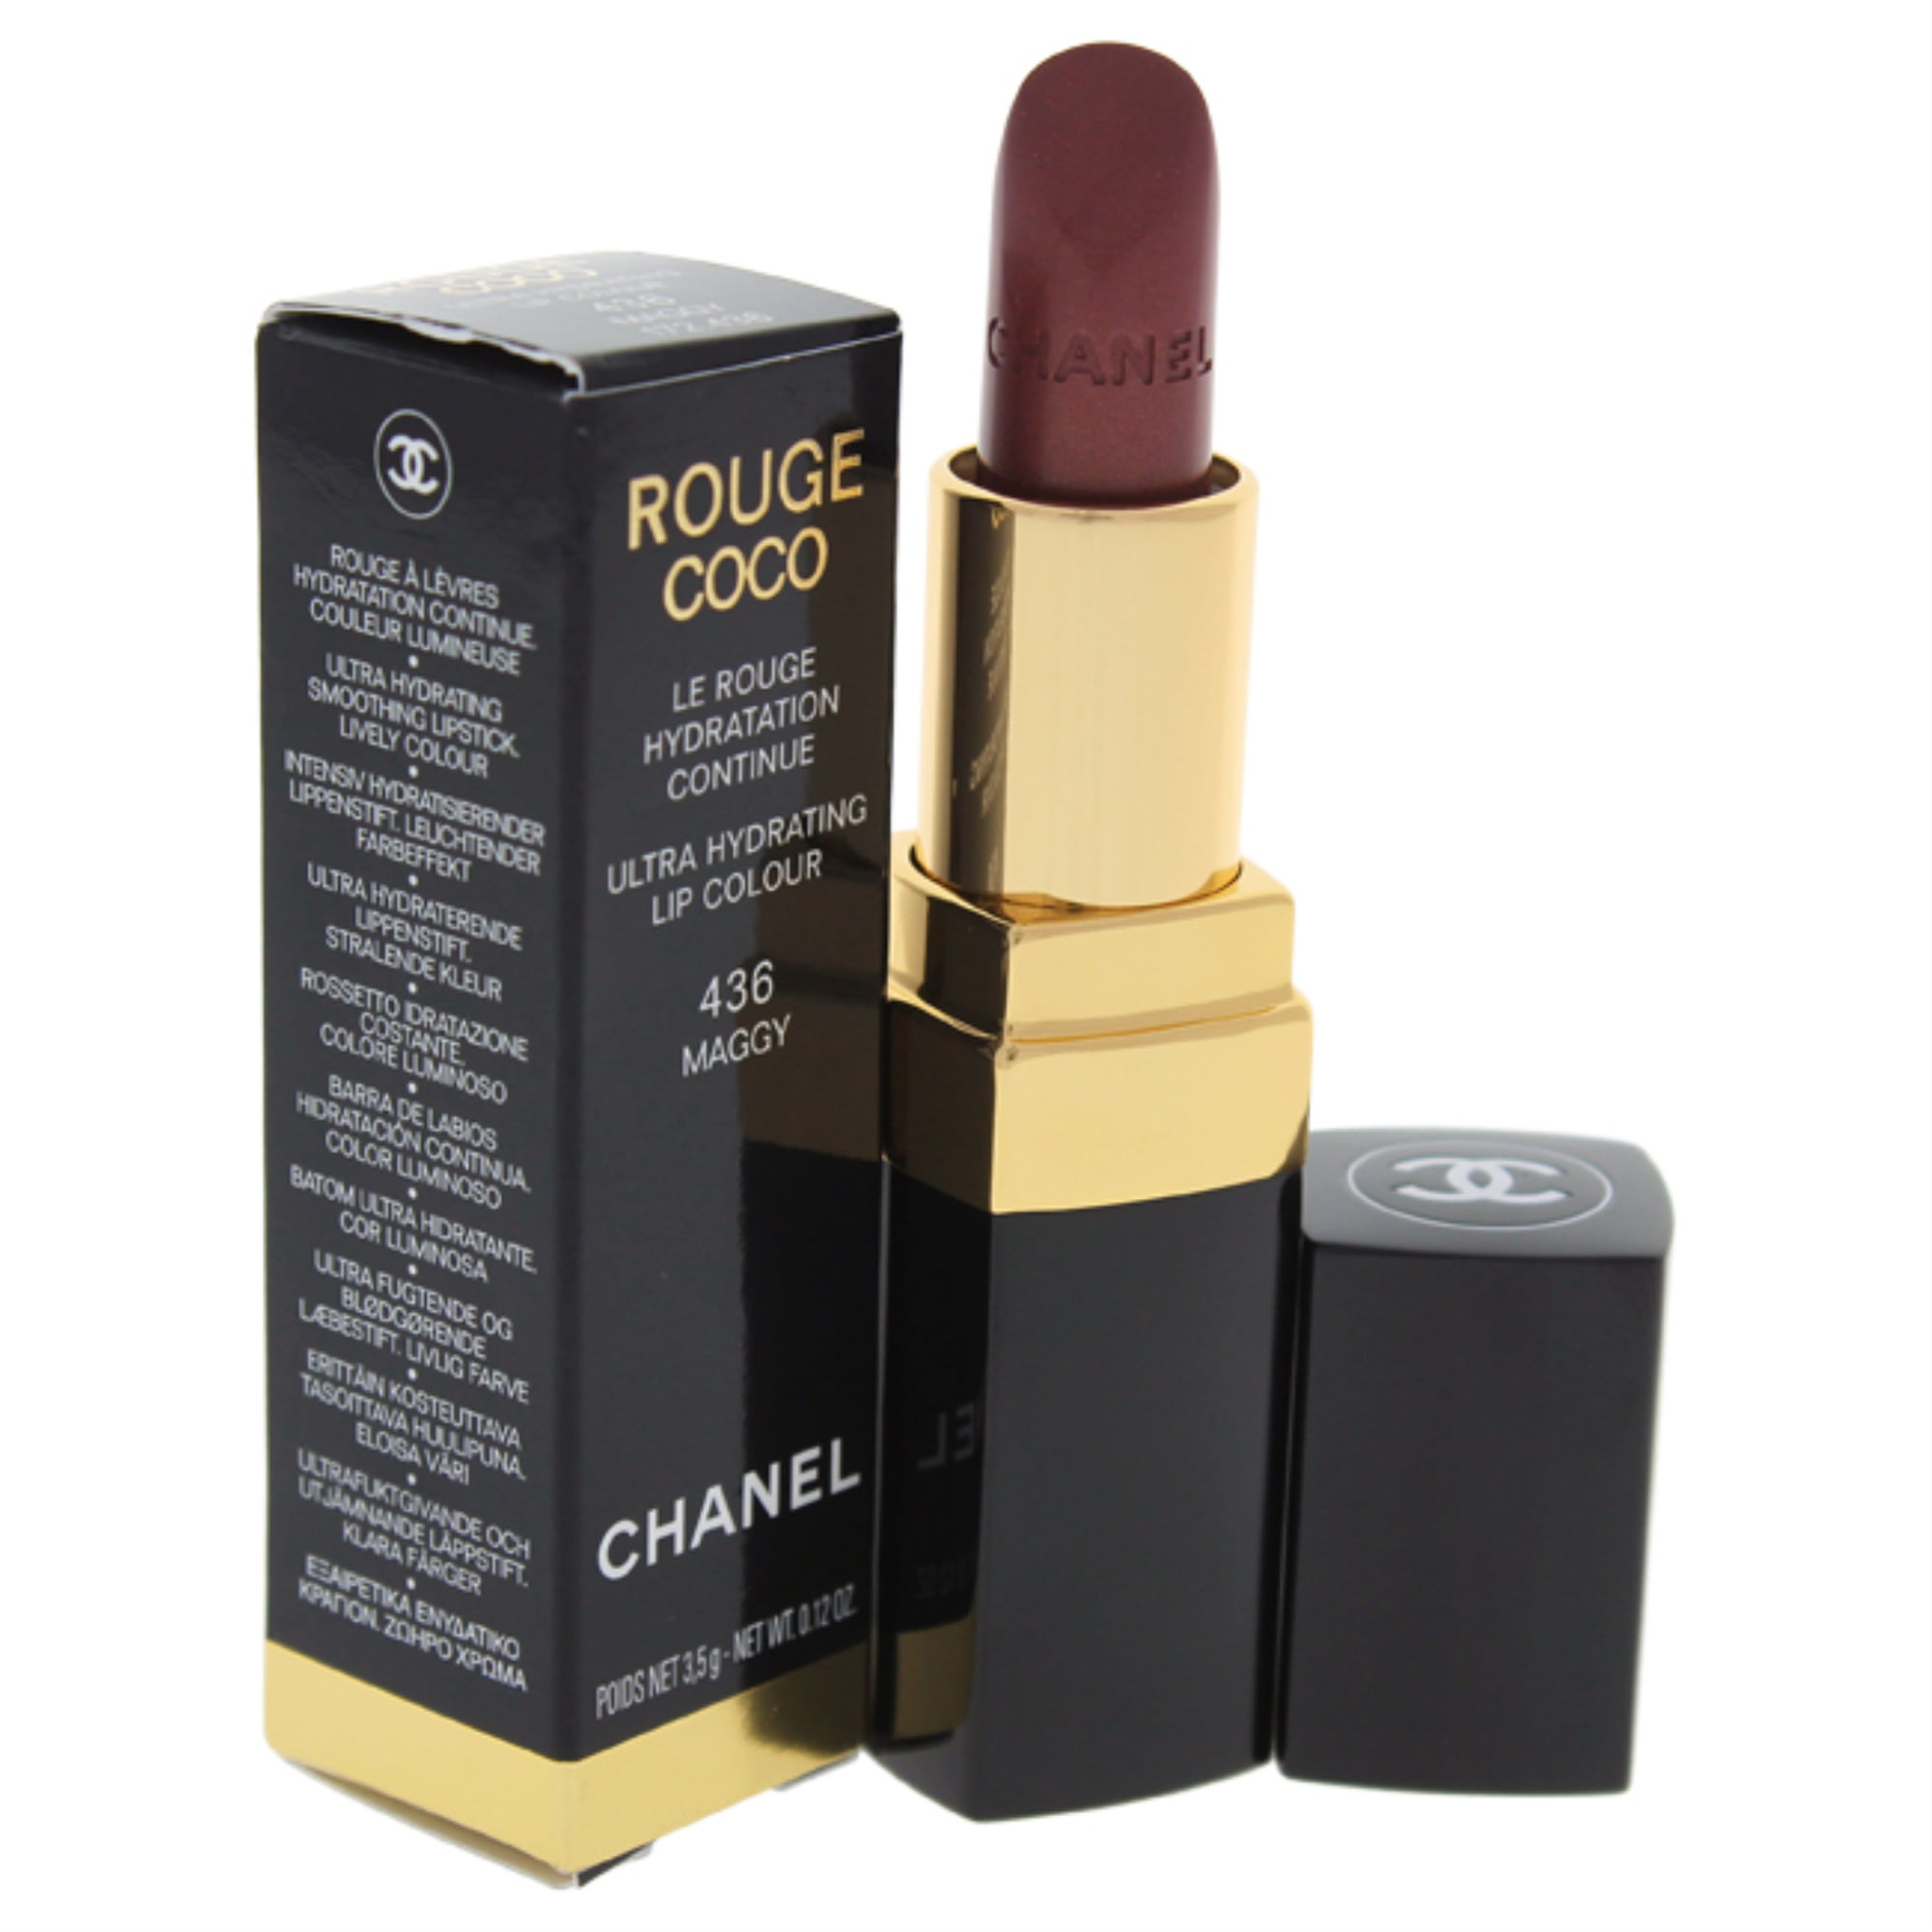 Generic Chanel Rouge Coco Ultra Hydrating Lipstick Colour 436 Maggy - Price  in India, Buy Generic Chanel Rouge Coco Ultra Hydrating Lipstick Colour 436  Maggy Online In India, Reviews, Ratings & Features